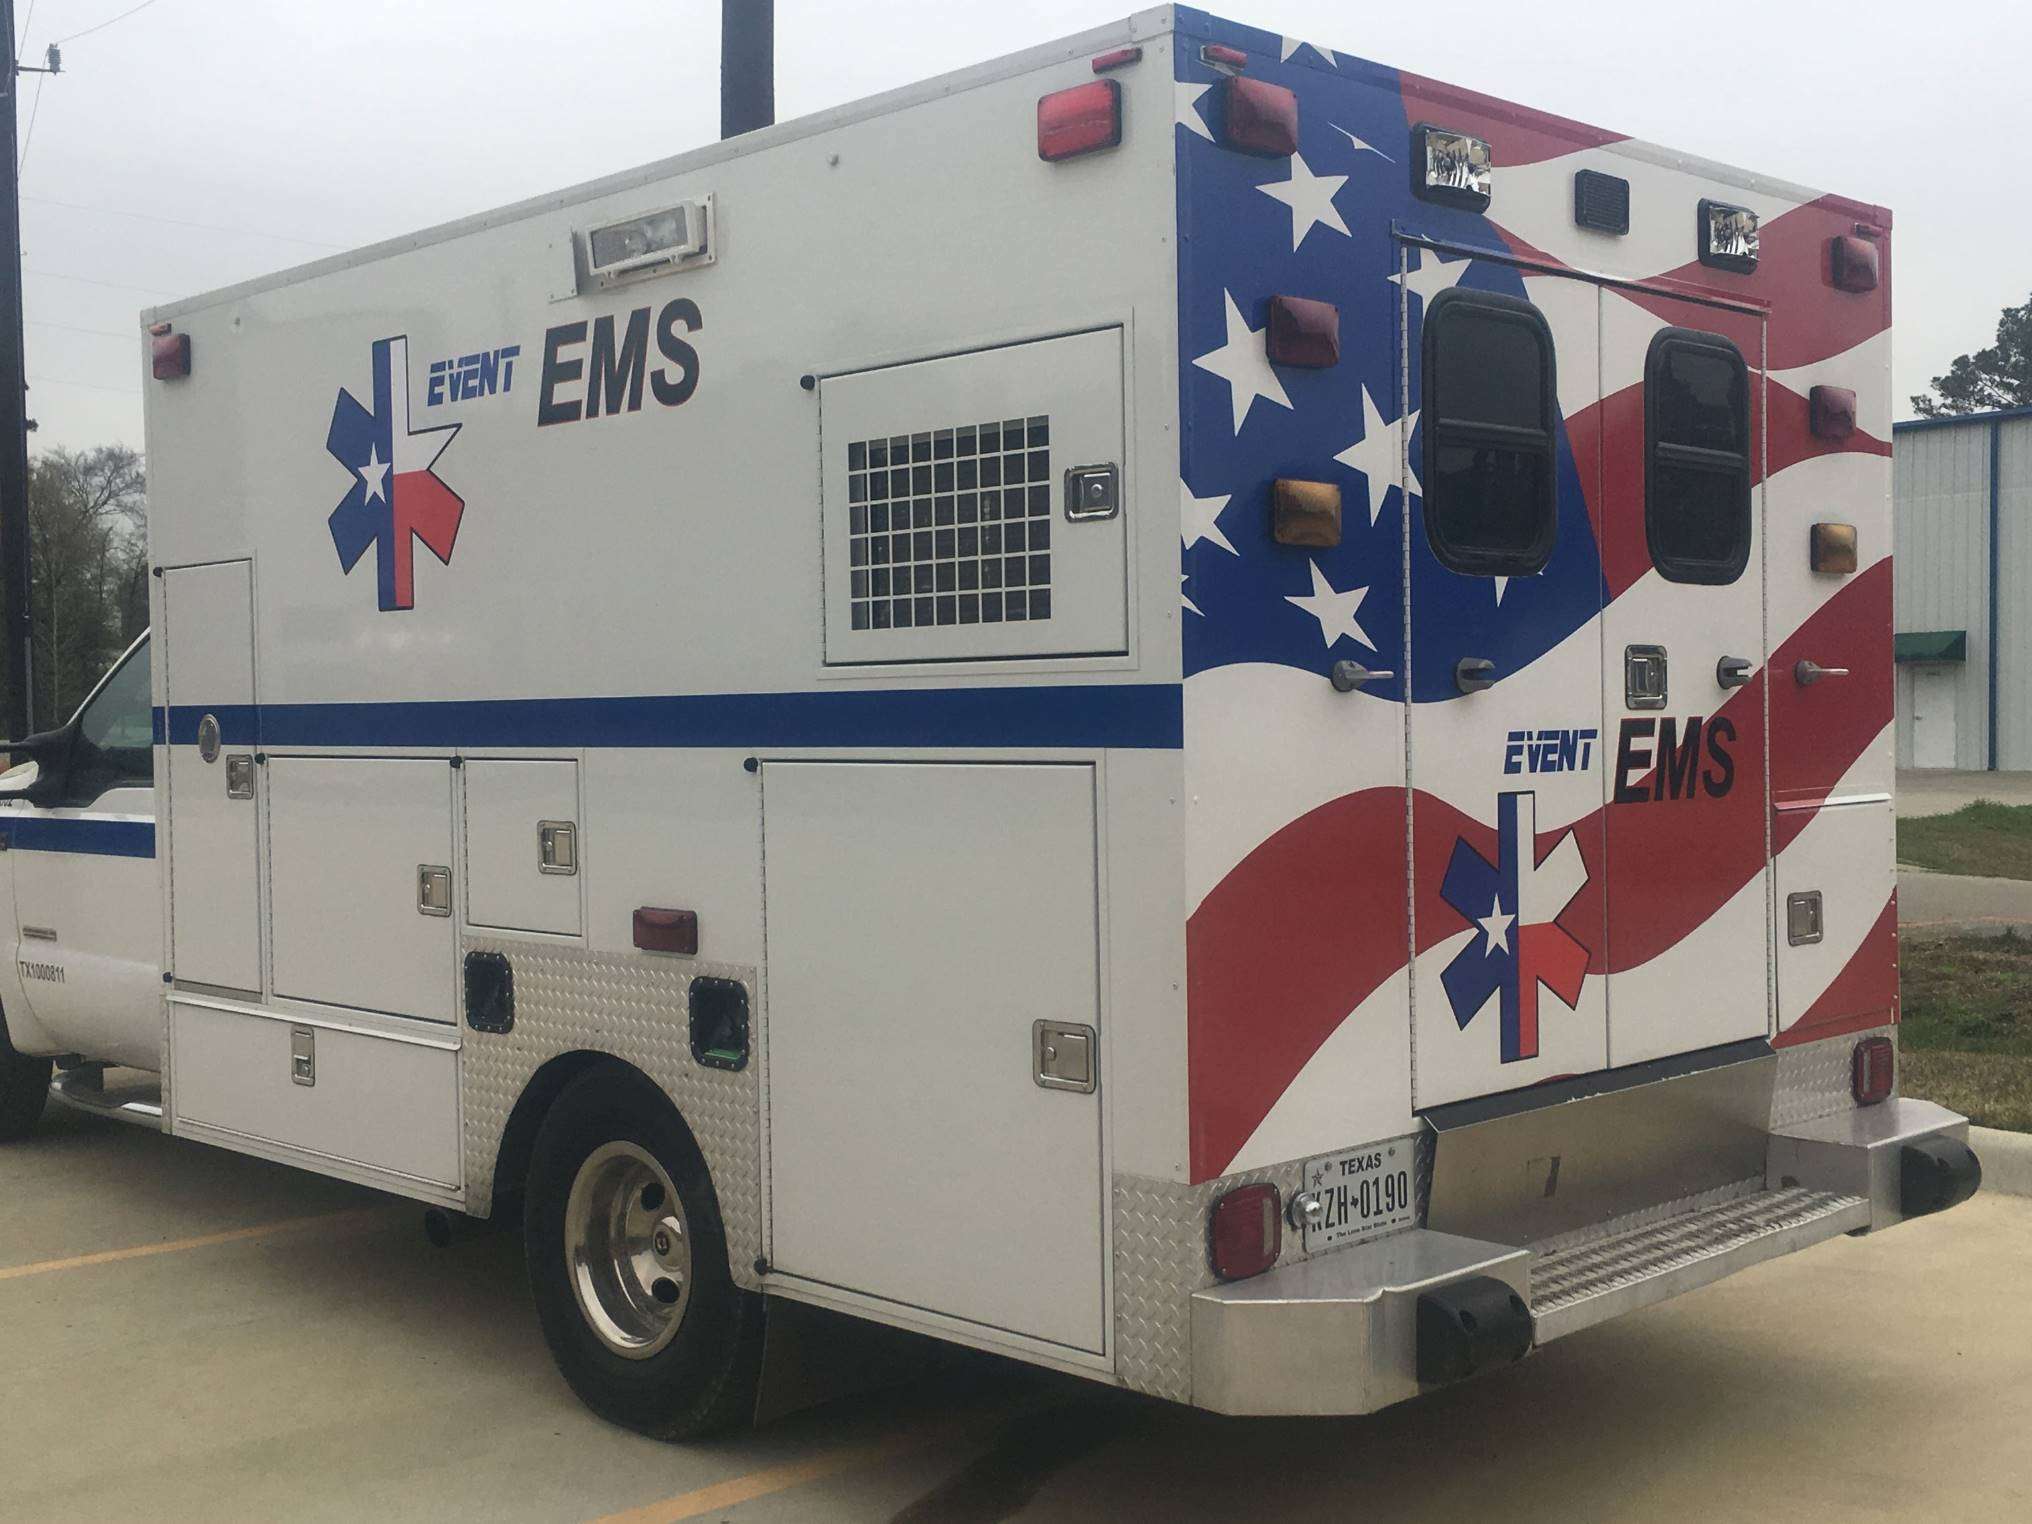 Custom vehicle wrap on a EMT vehicle that is outside